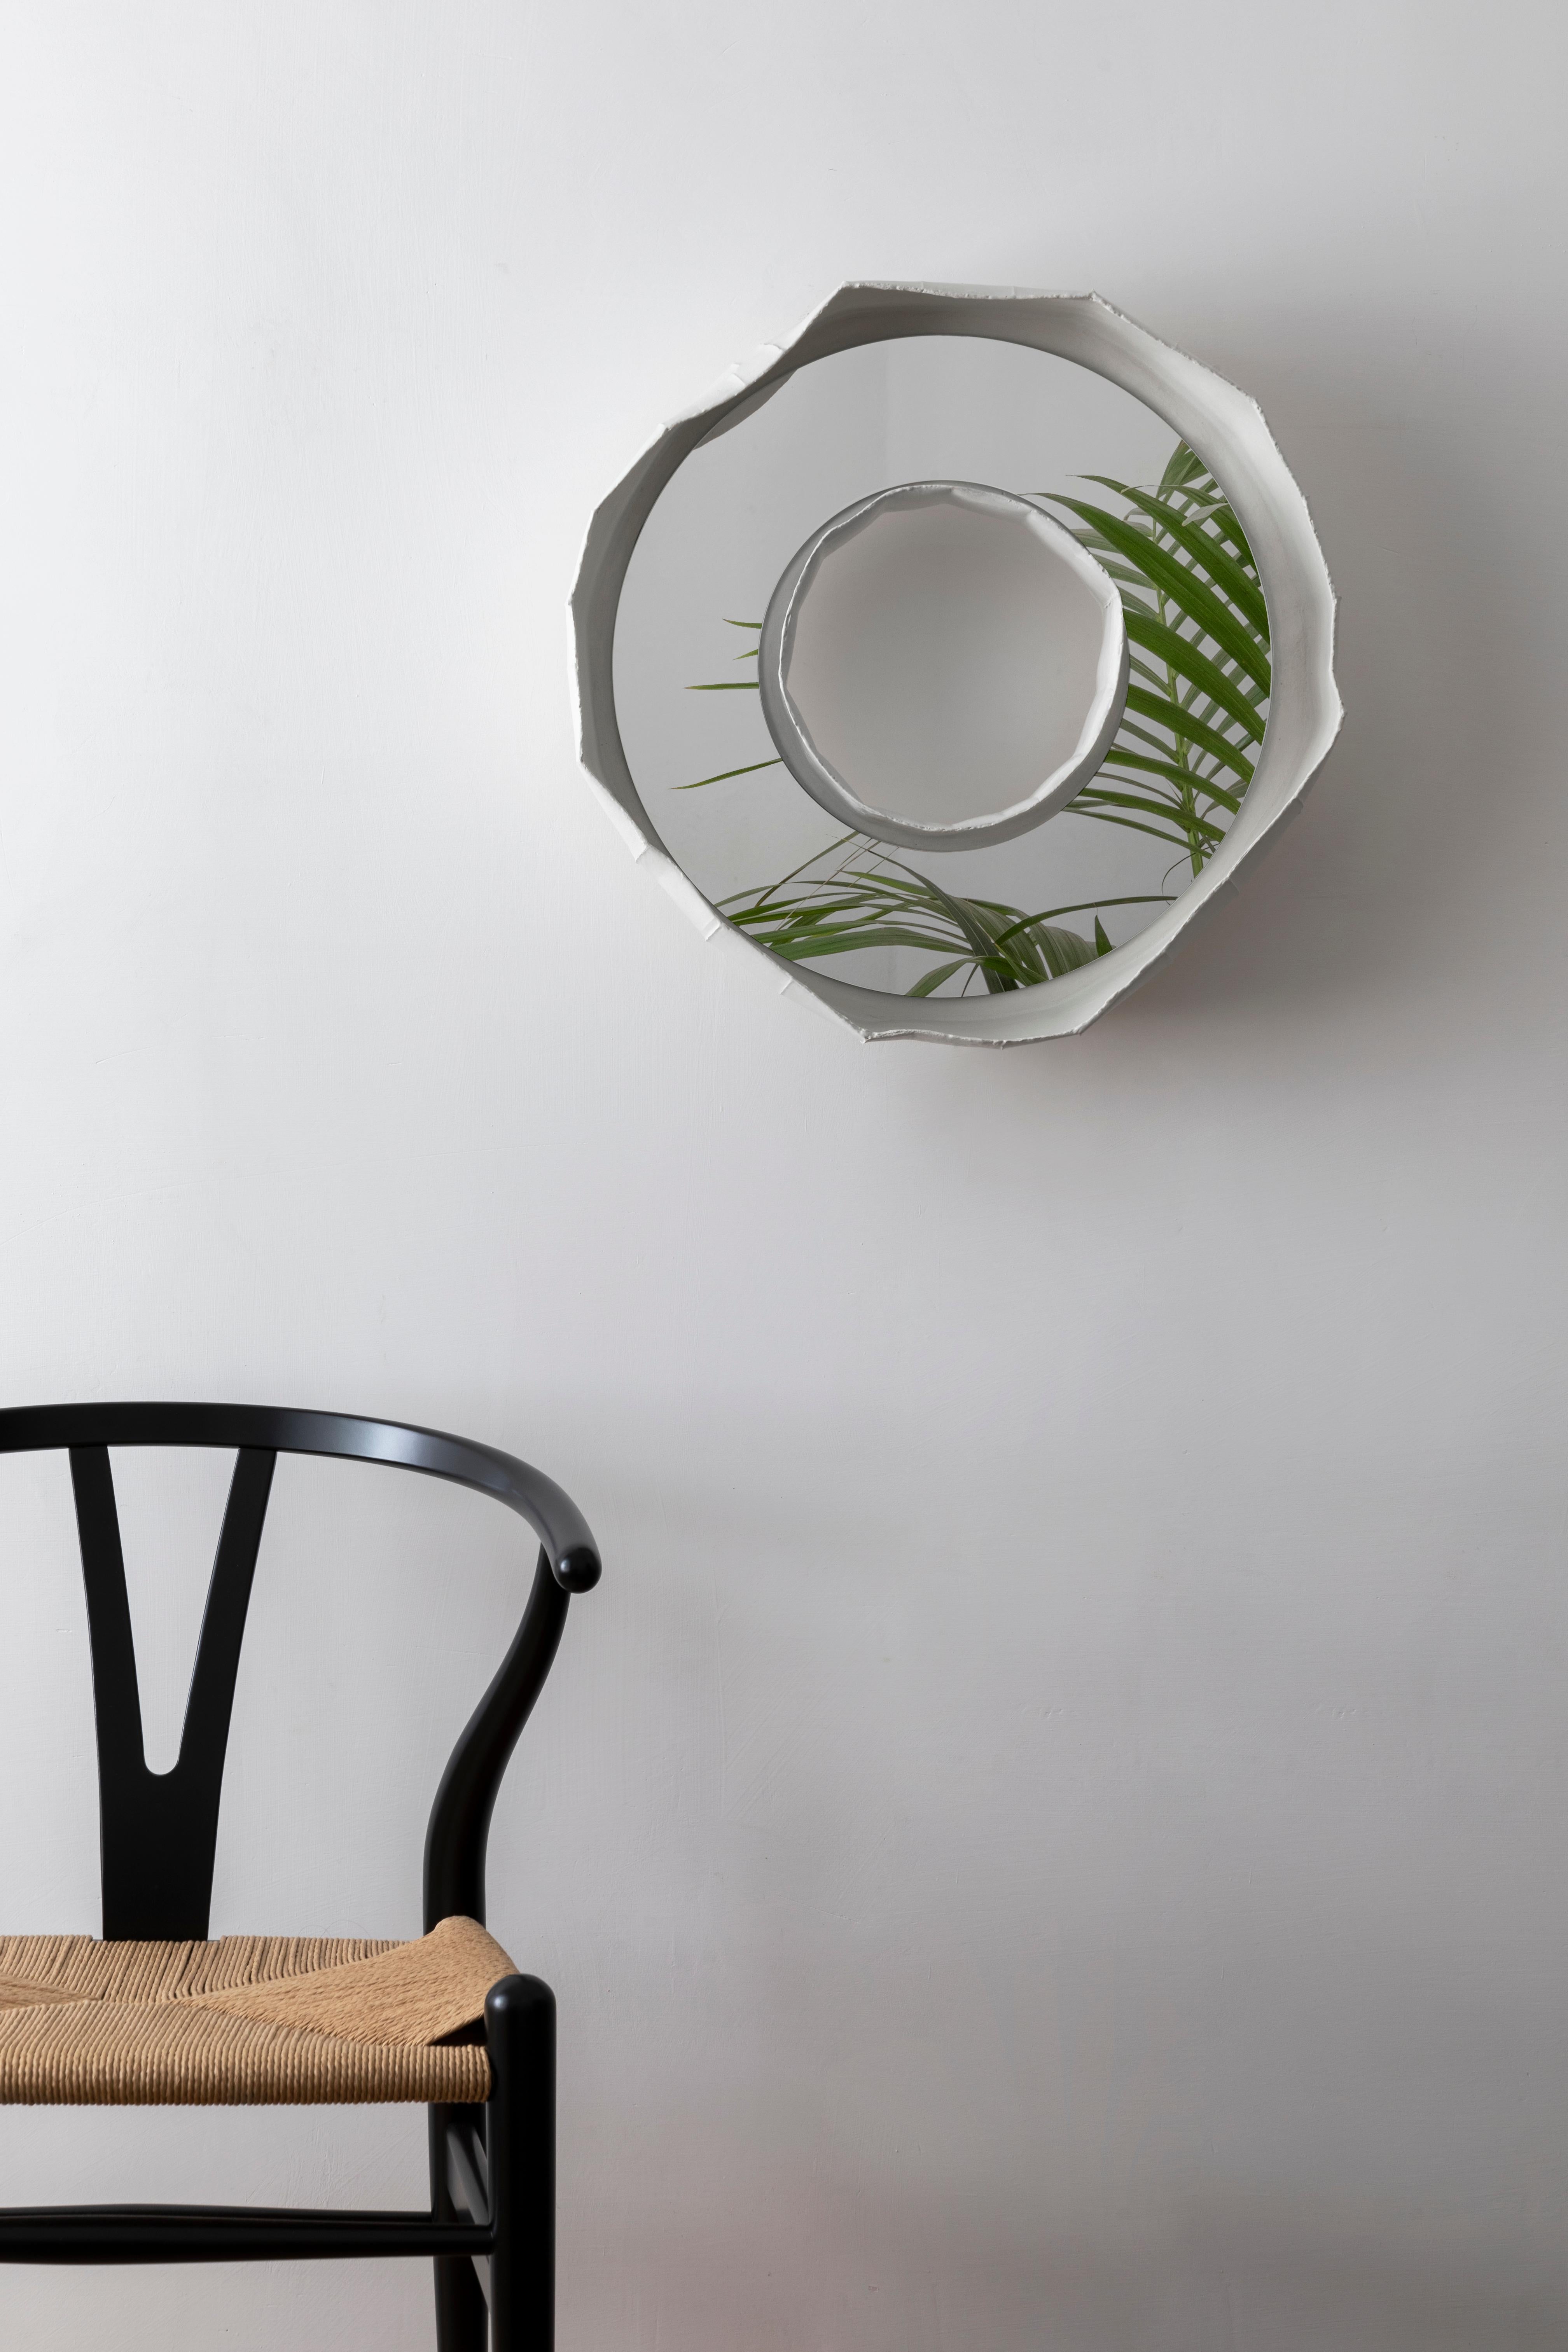 RING NOVA, a stunning ceramic mirror handmade in Italy, one of 2 designs that make up the collection REFLECTIONS, the result of a collaboration between artist Paola Paronetto & designer Giovanni Botticelli, that integrates ceramic with colour and